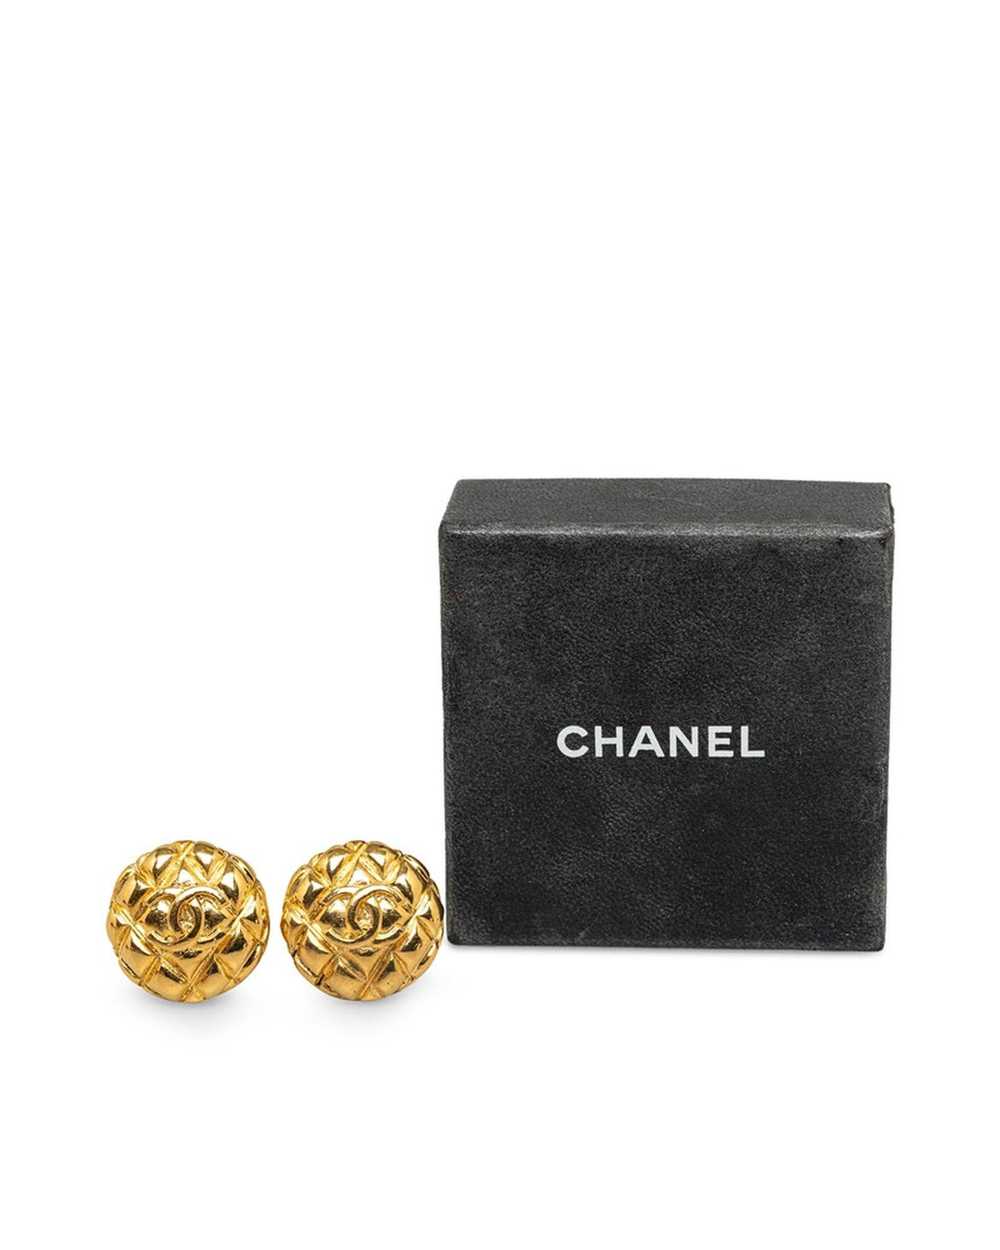 Chanel Gold Quilted Clip-On Chanel Earrings - image 4